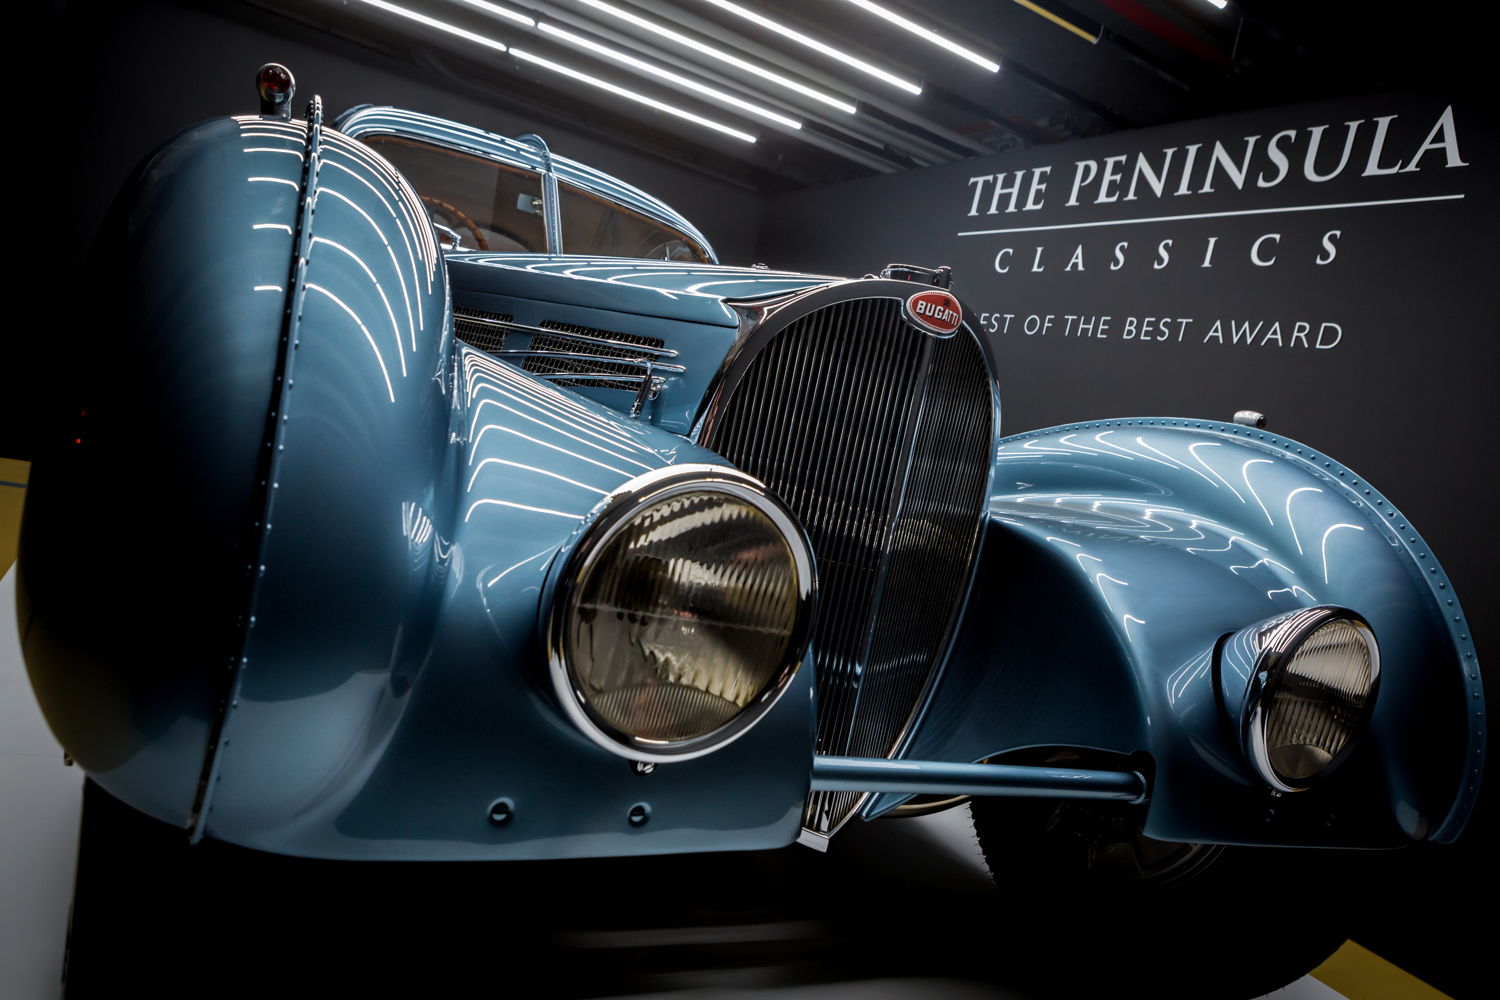 2. Bugatti headlamps: "The winning Bugatti was famously riveted externally for fear of the magnesium-alloy body parts catching fire."
Photo credit Cedric Canezza